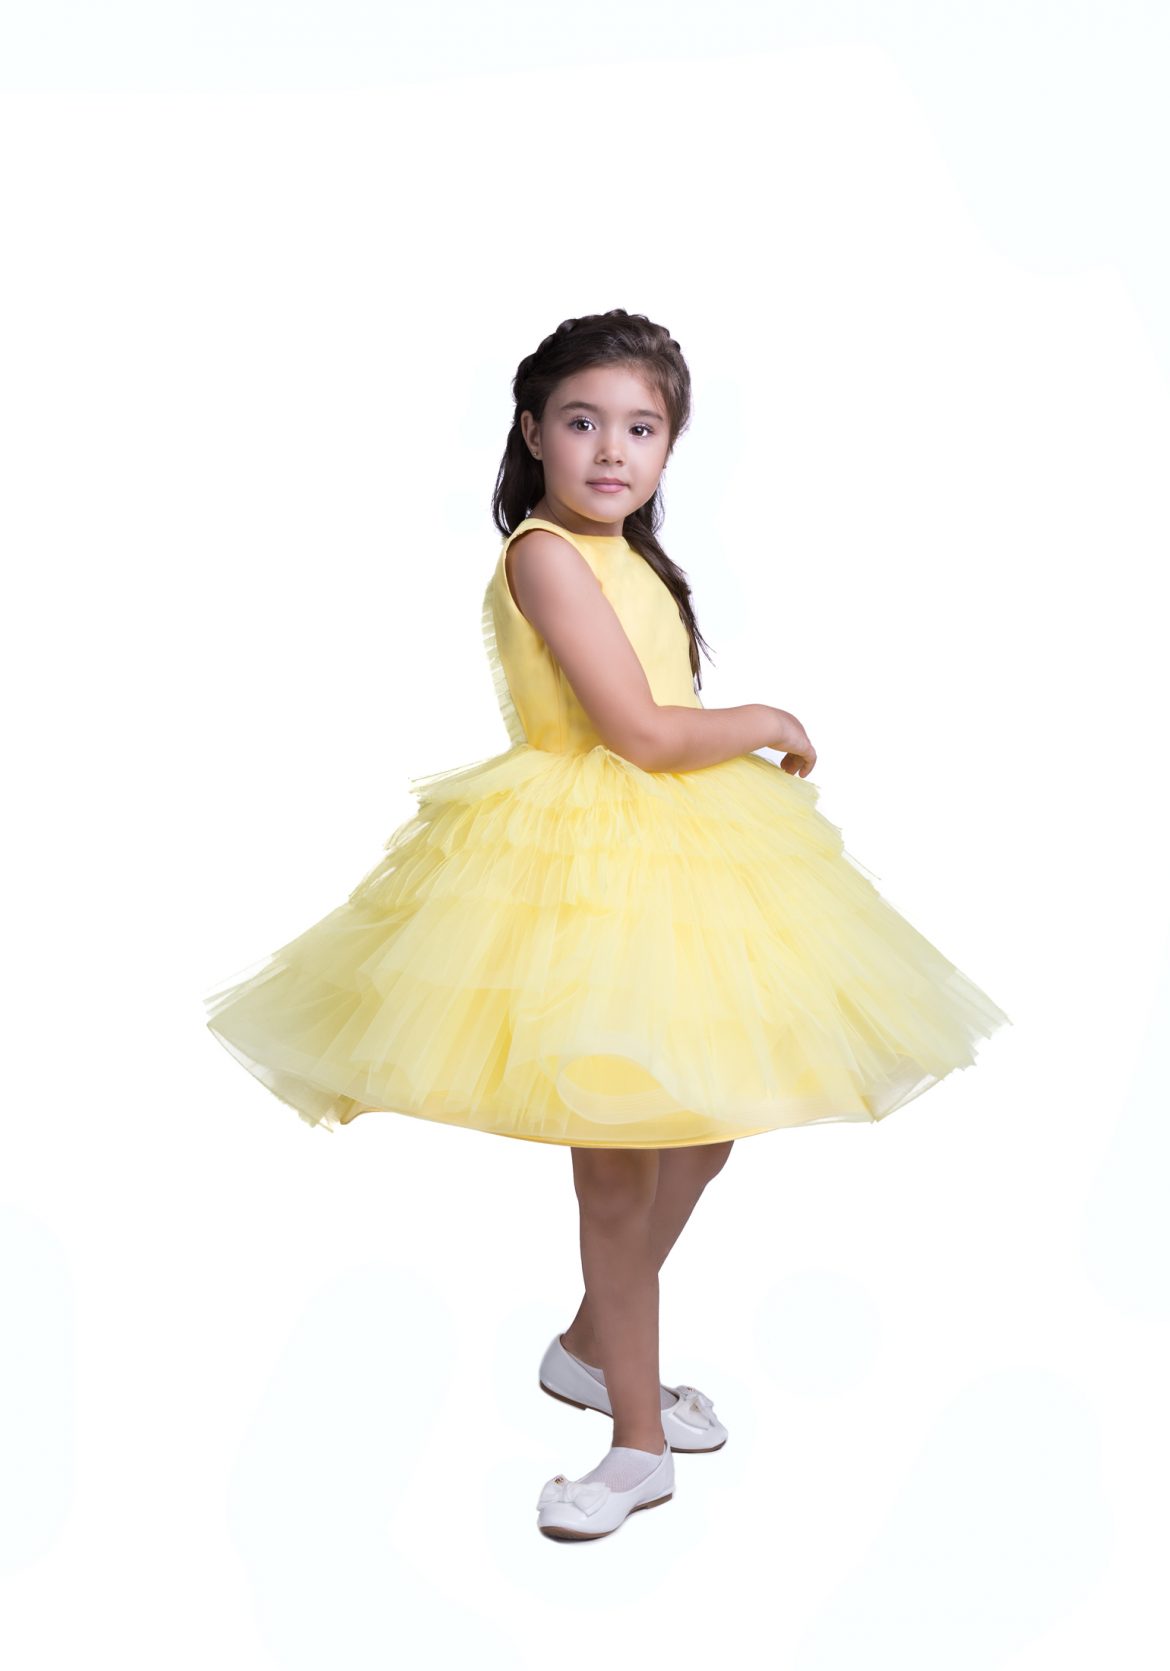 NEW ELENA LUKA MAGIC COLLECTION FOR YOUR LITTLE PRINCESS